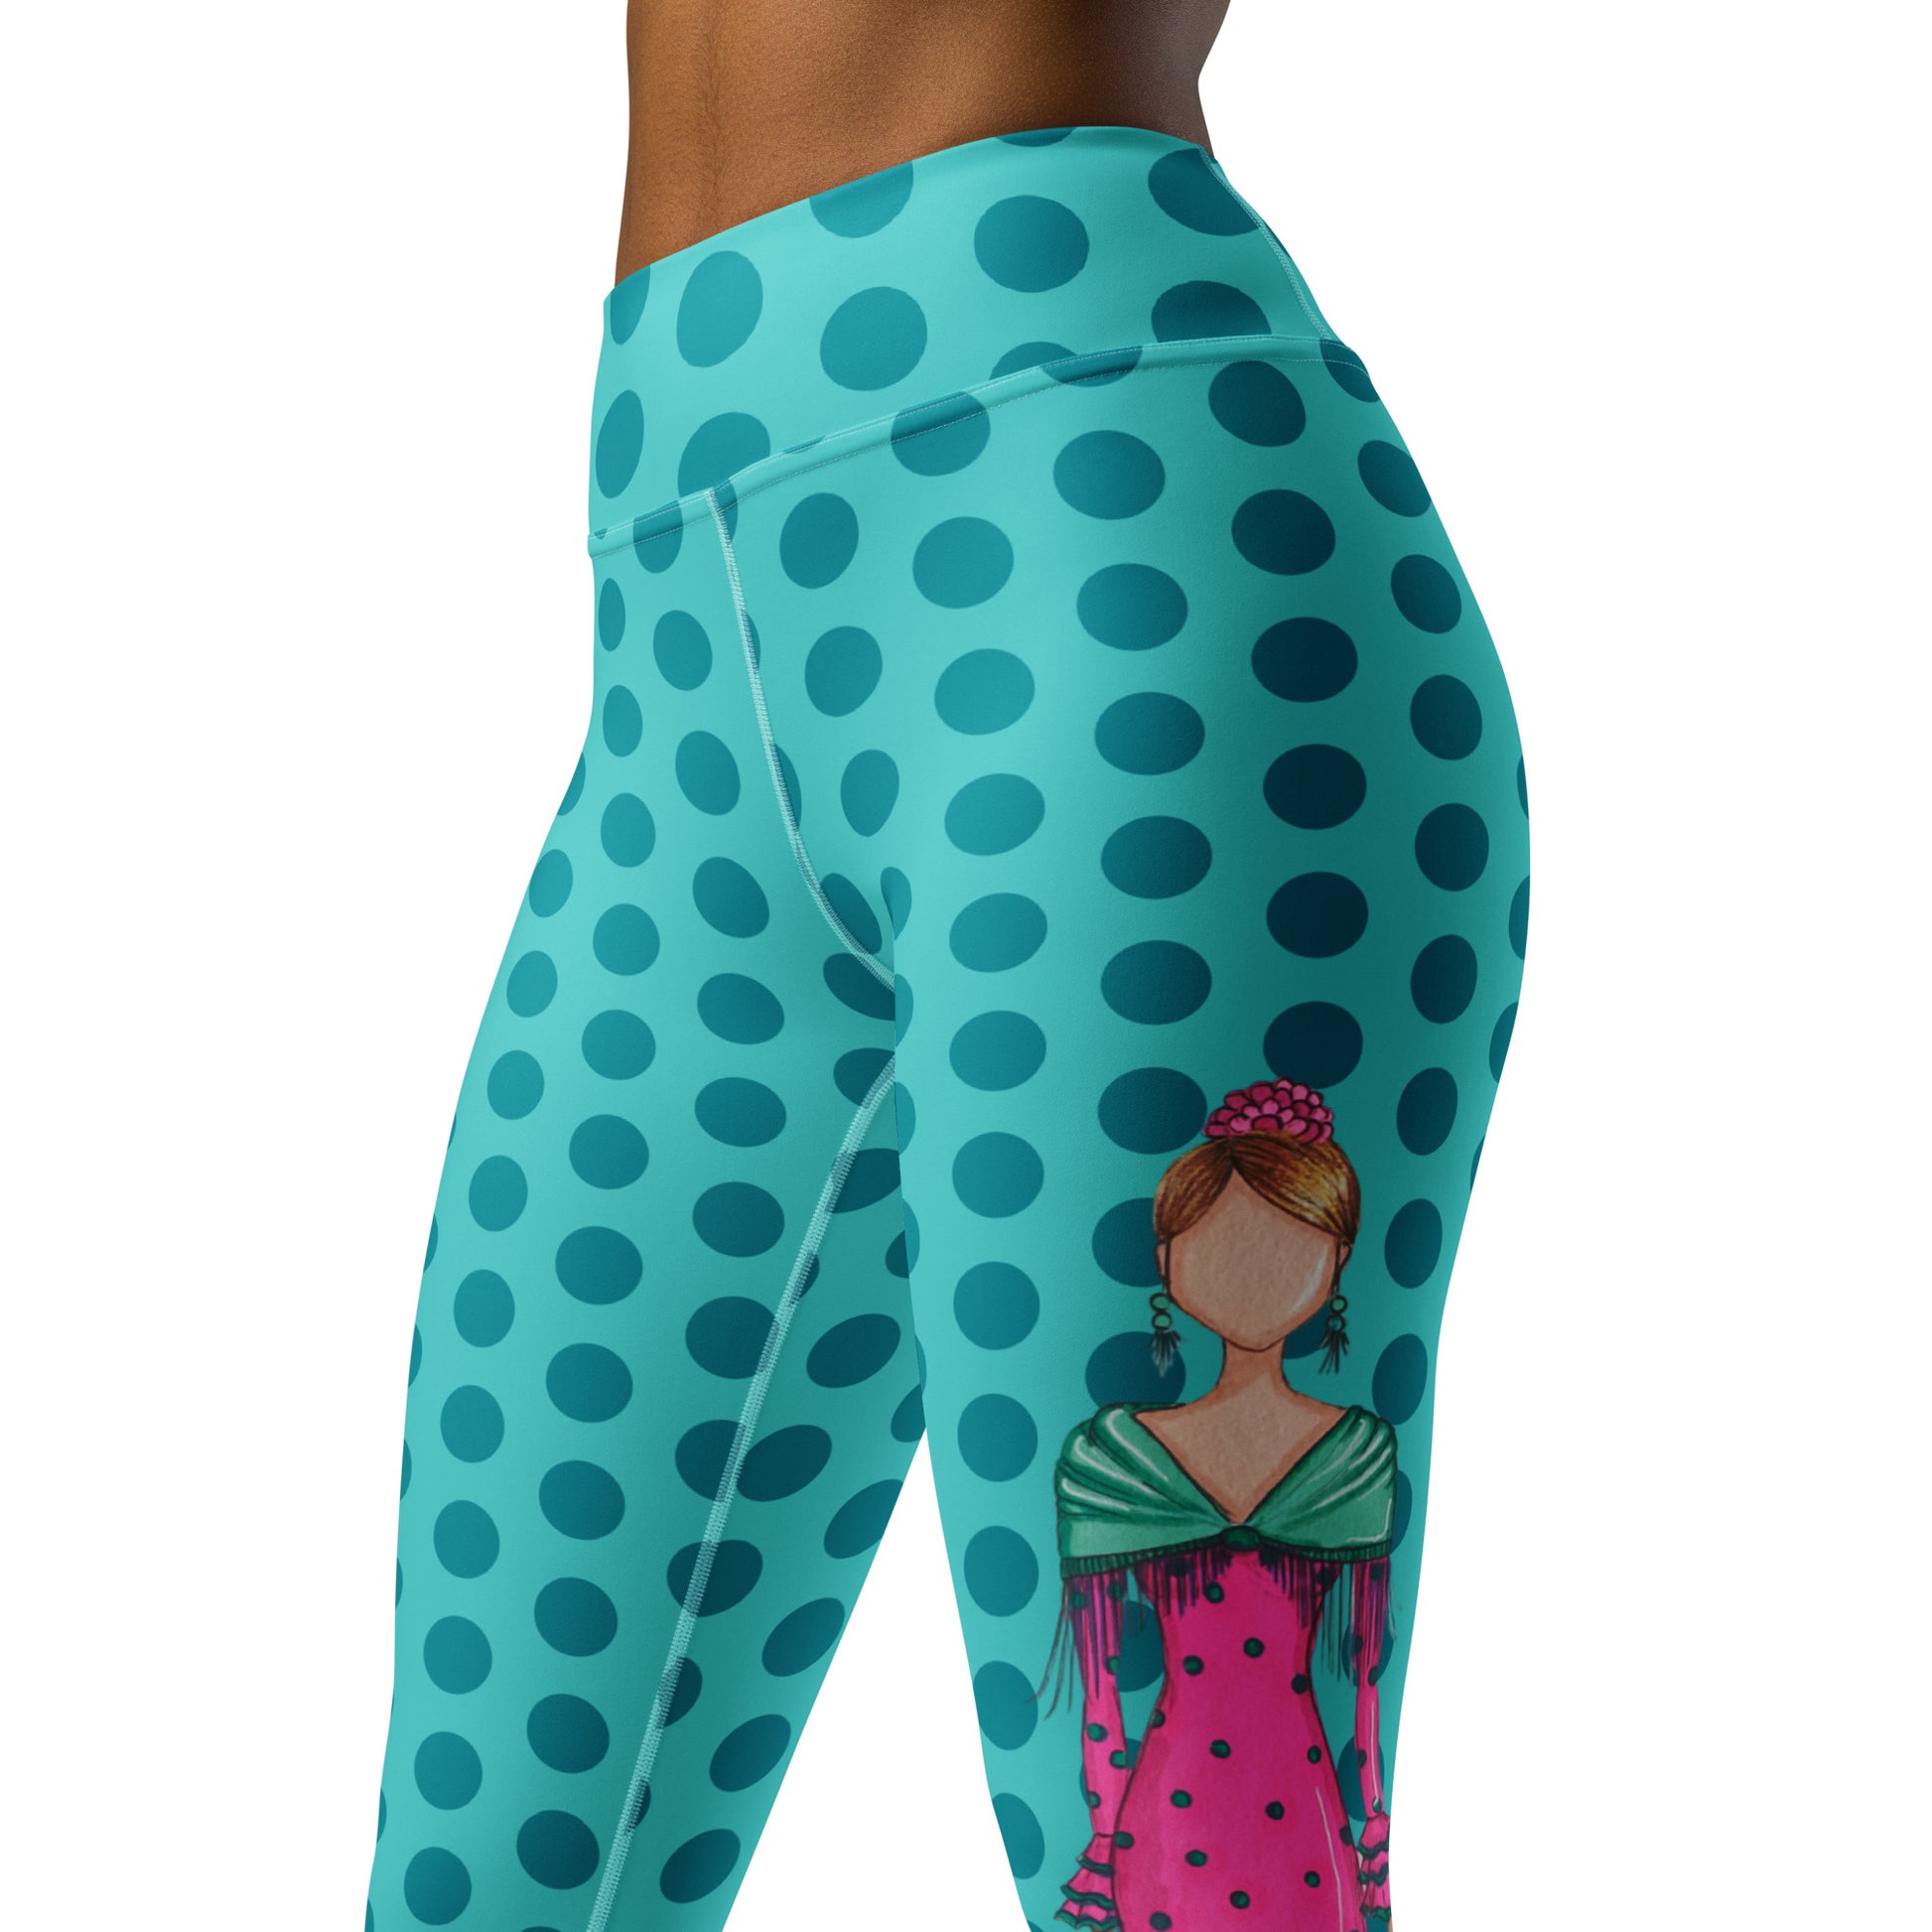 Flamenco Dancer Leggings, turquoise with green polka dots high waisted yoga leggings with a pink dress and green shawl - IllustrArte